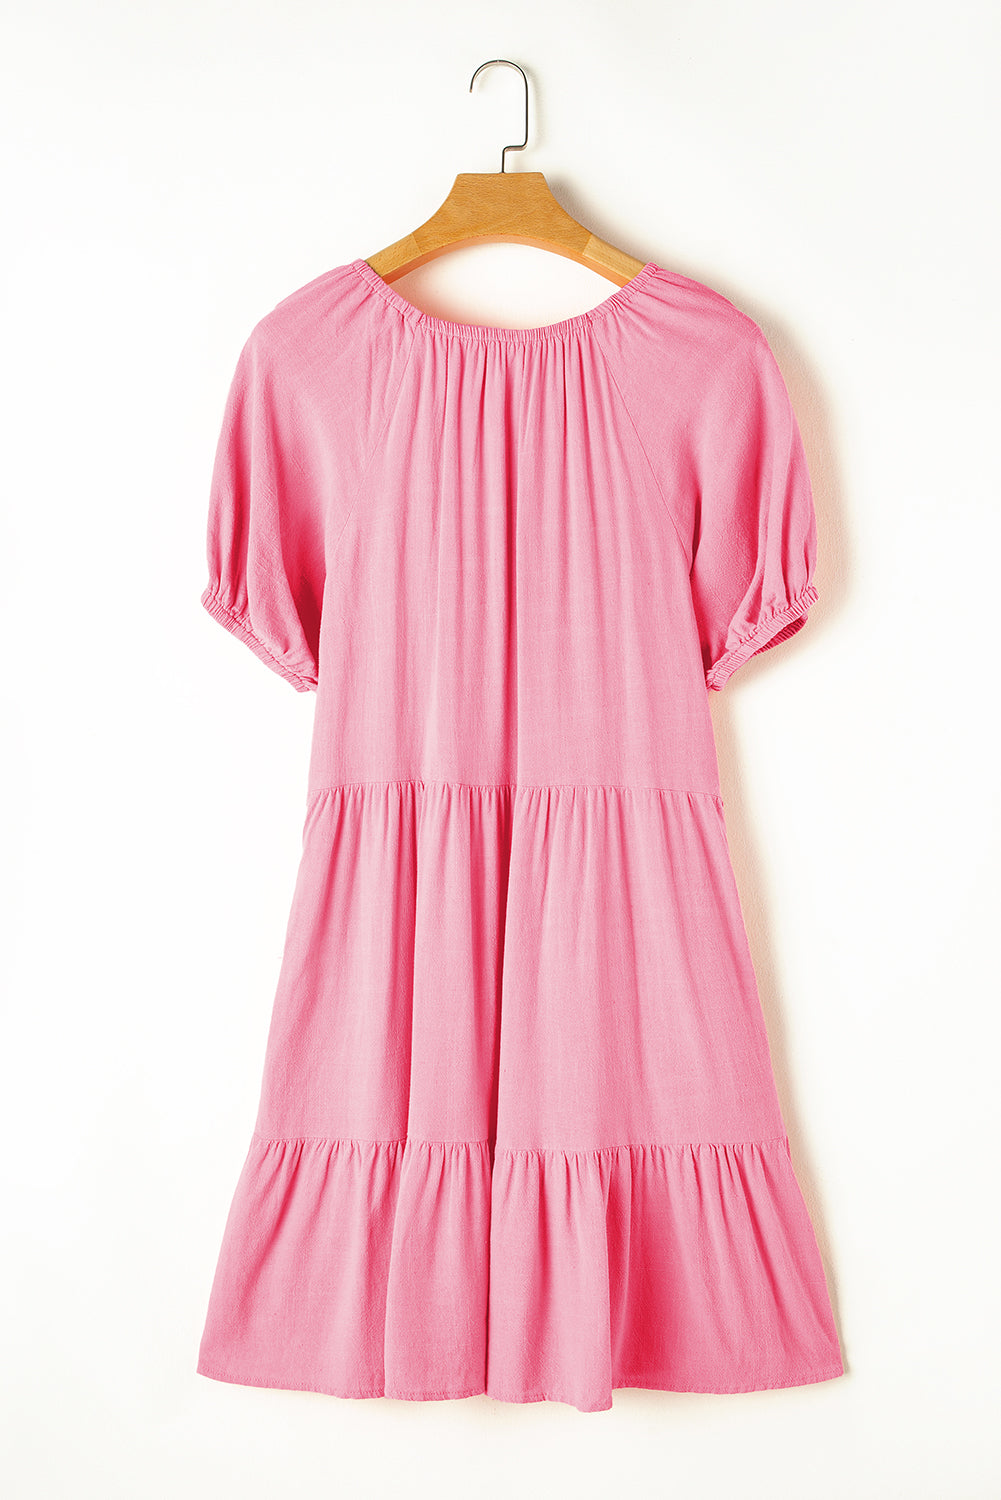 Strawberry Pink Puff Sleeve V Neck Tiered Swing Dress Blue Zone Planet